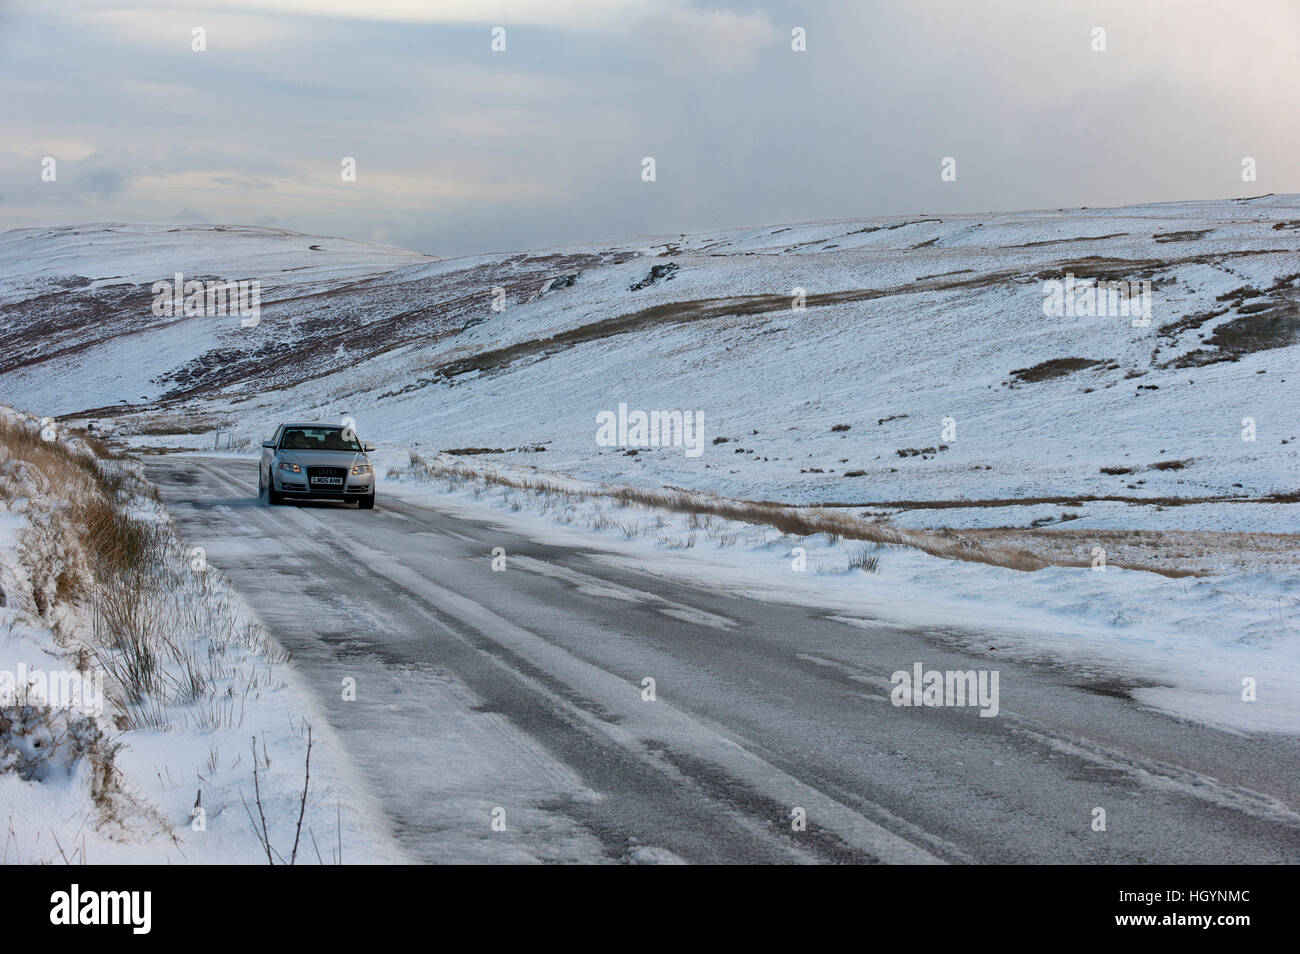 Elan Valley, Powys, Wales, UK. 13th January, 2017. Strong wind causes drifting of snow on the mountain road at Elan Valley in Powys, Wales, UK. © Graham M. Lawrence/Alamy Live News. Stock Photo